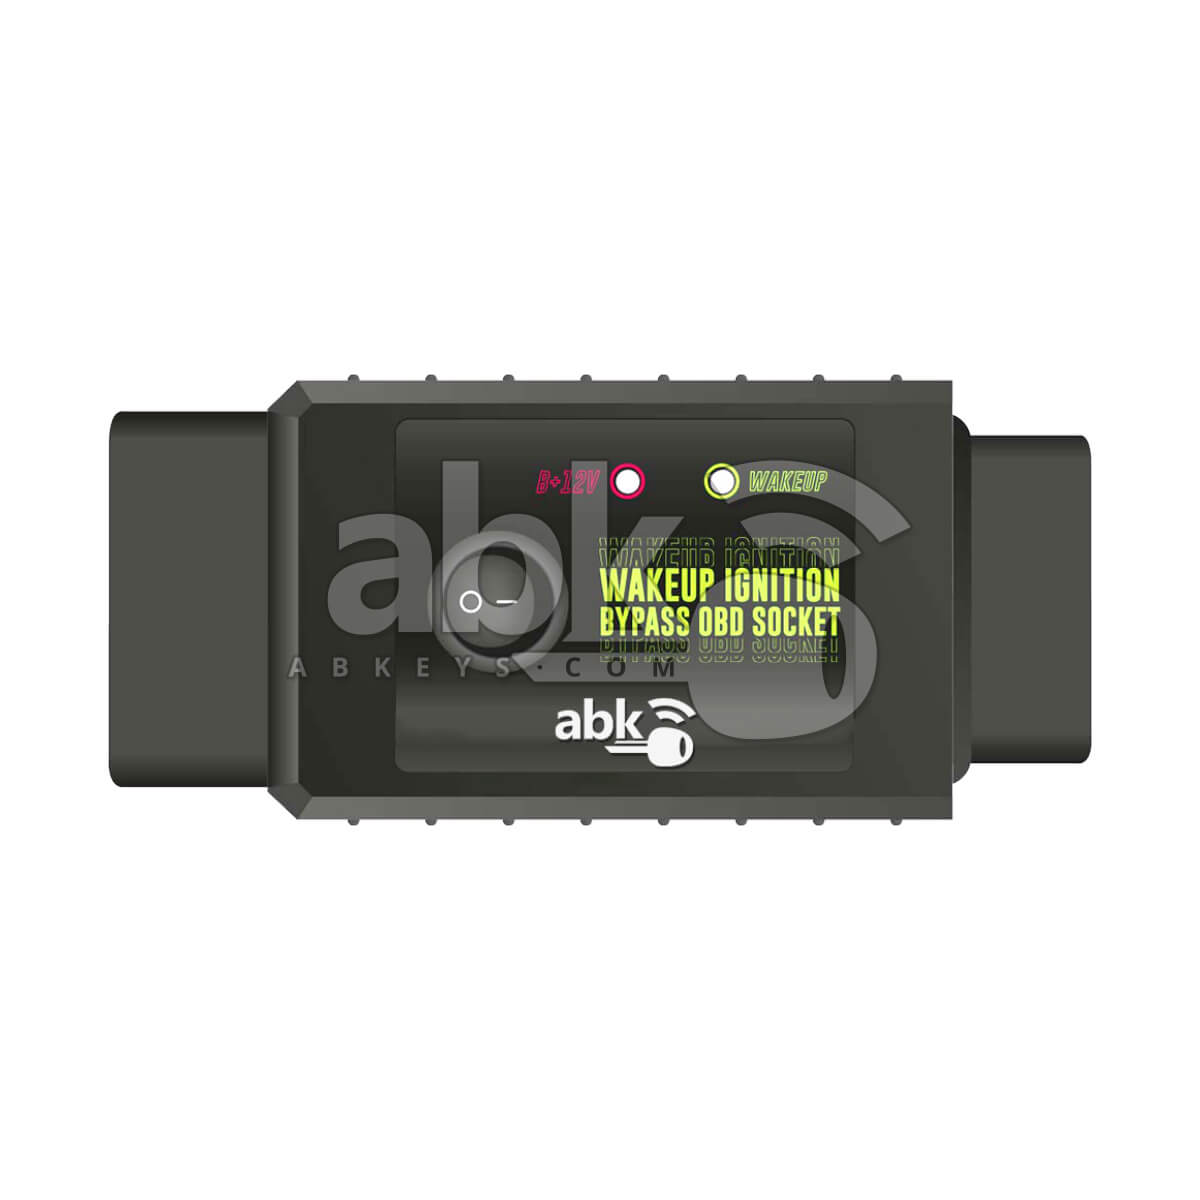 Wakeup Ignition Bypass OBD for VAG - Bmw - Land Rover ABK-2012